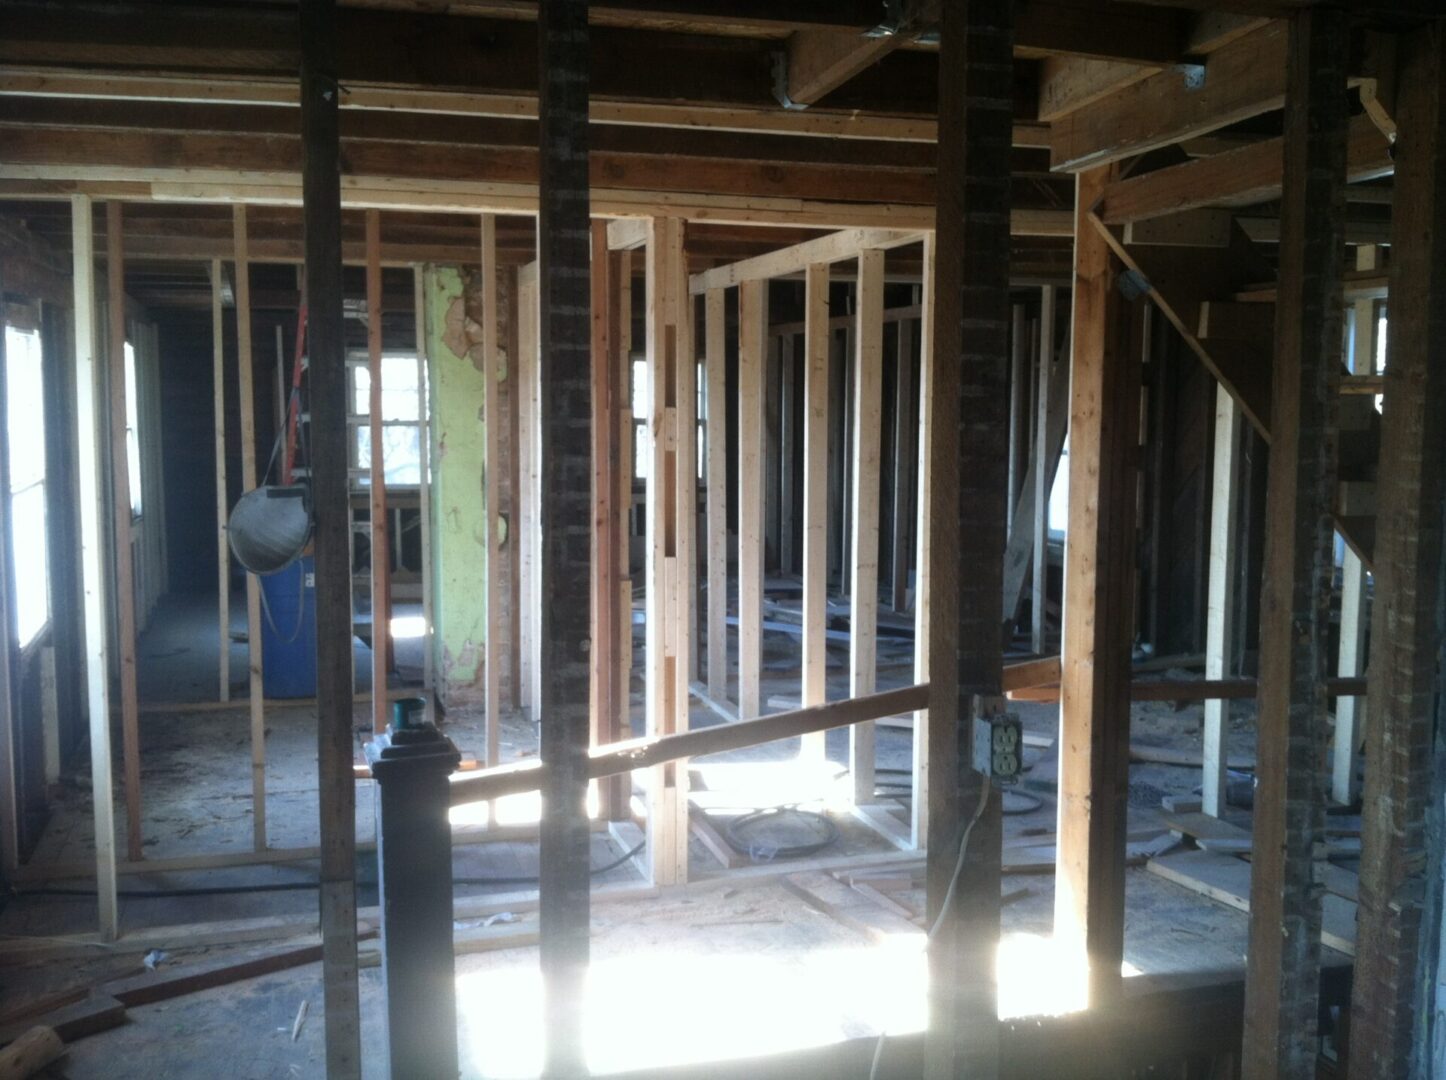 Wooden support beams of a home construction in progress